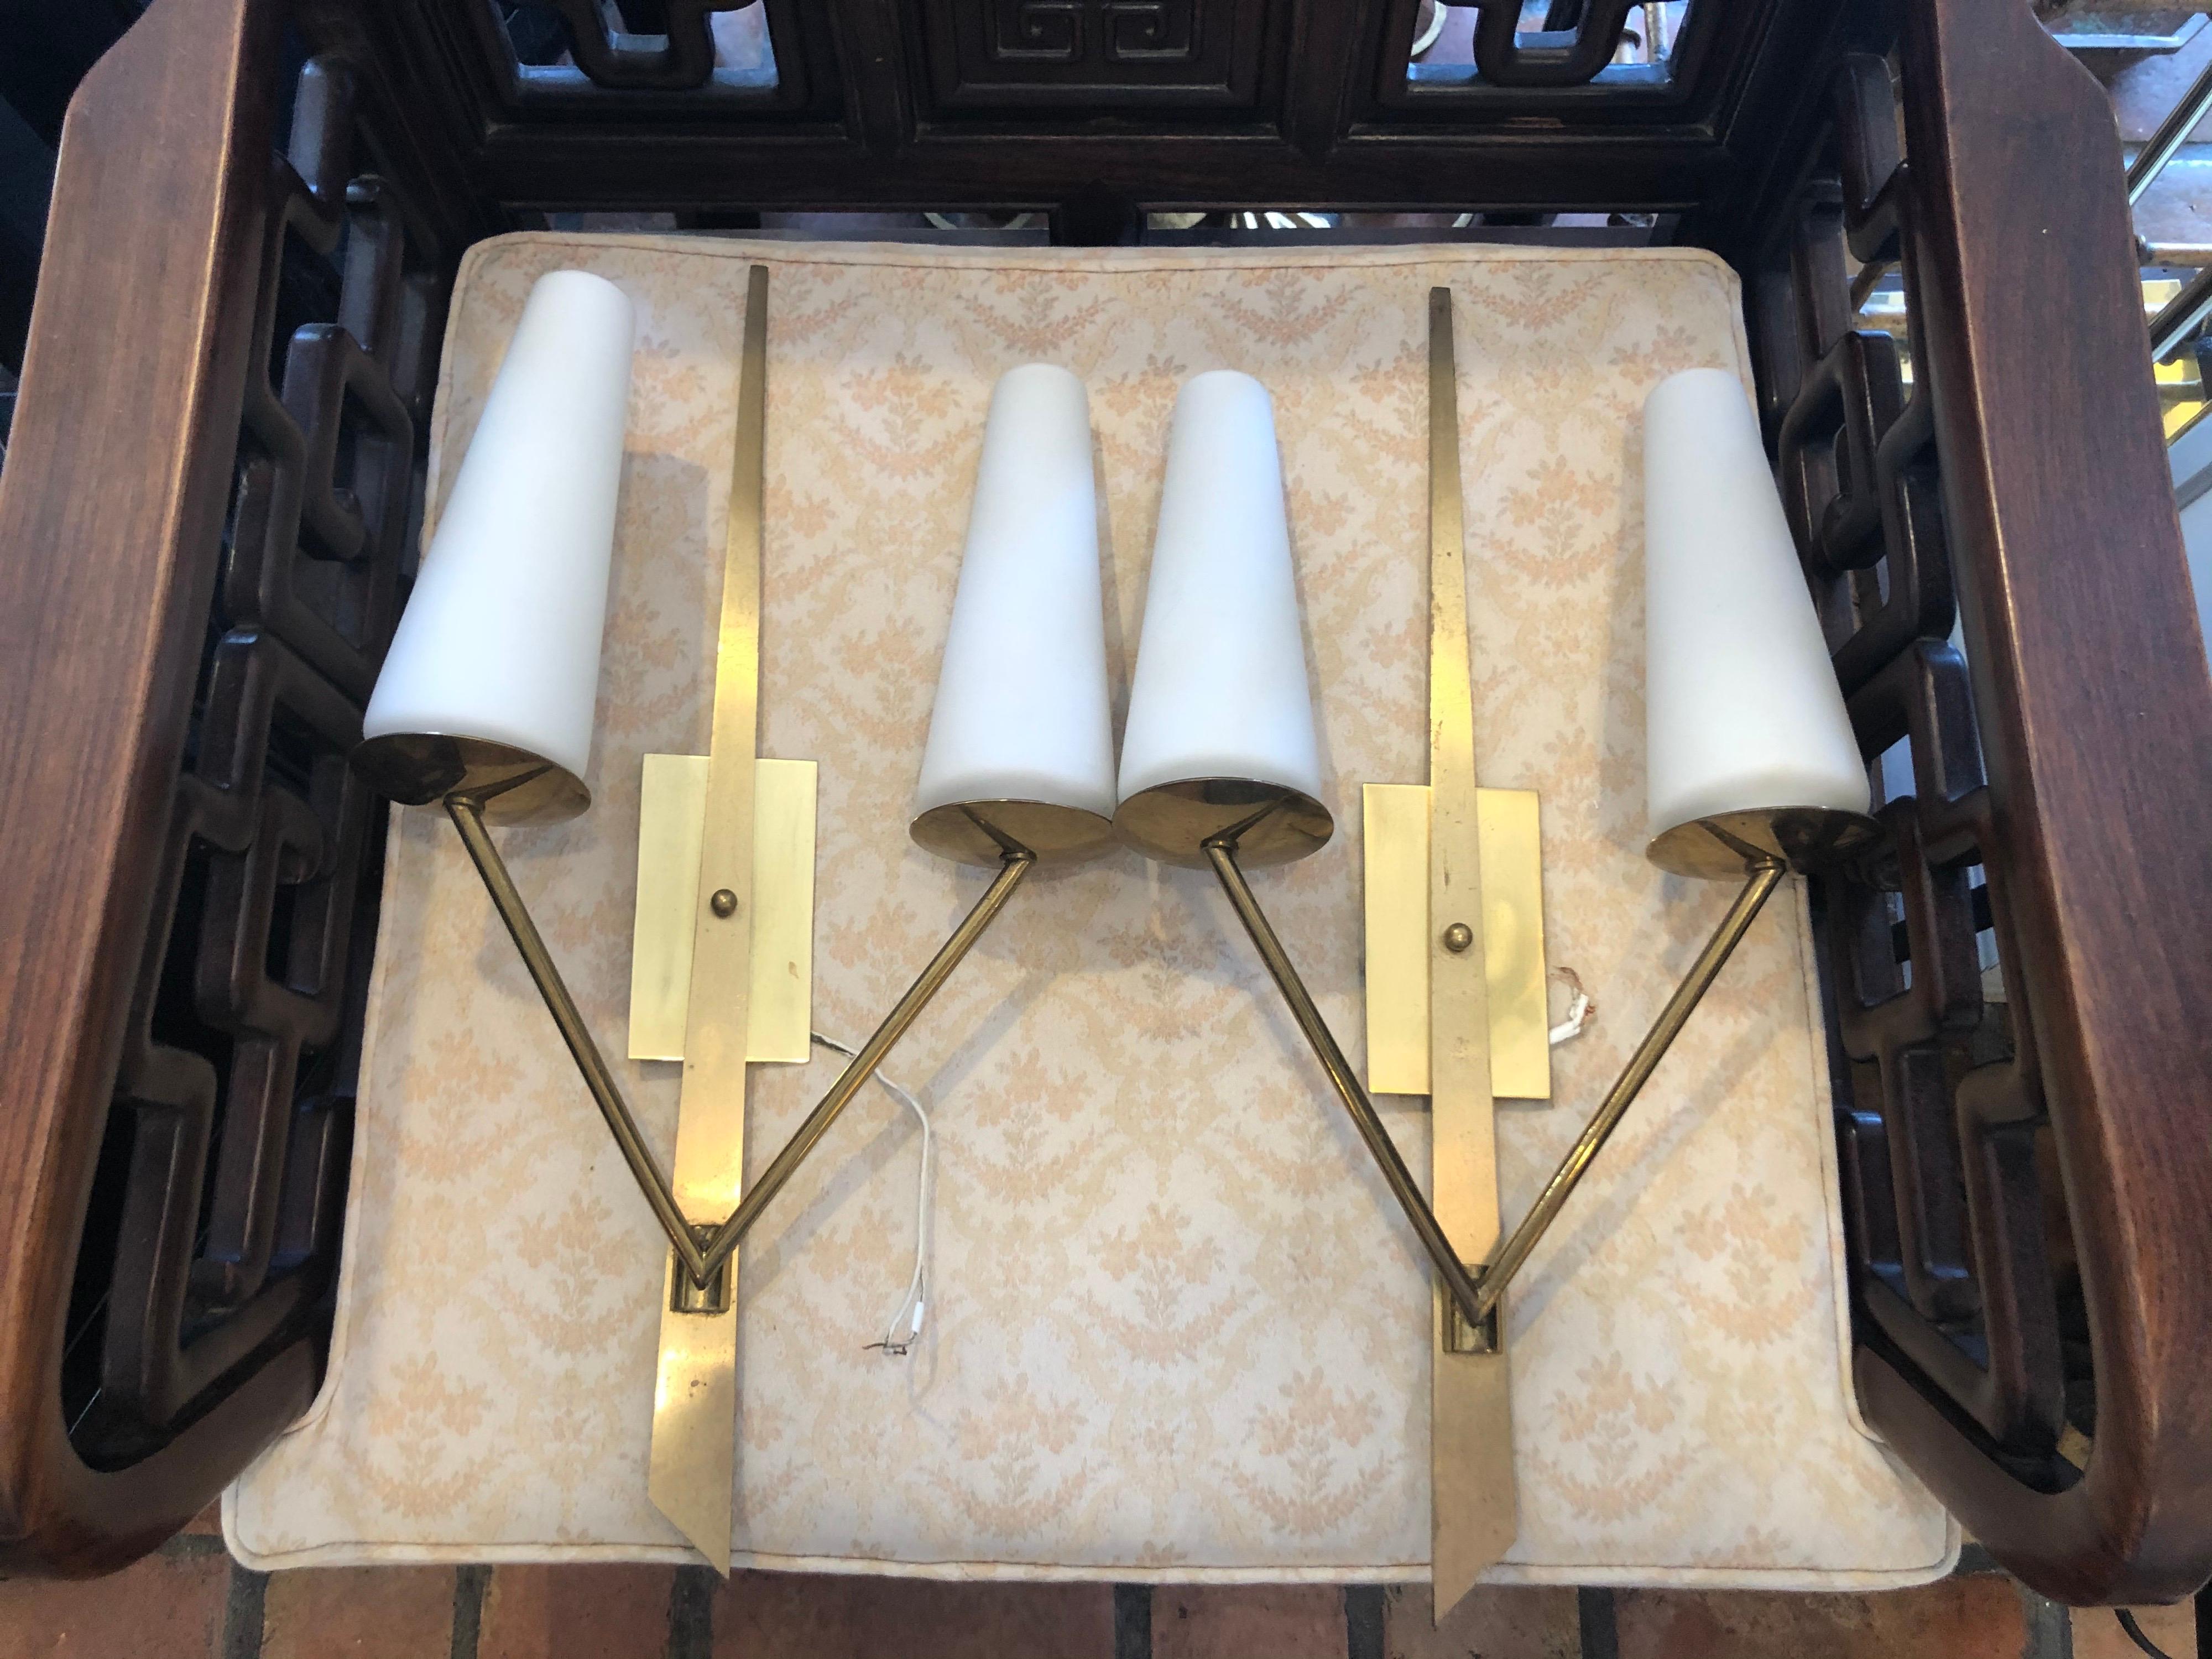 Pair of Mid Century Maison Arlus Sconces .Circa 1950. Minimalist brass with white glass shades. Classic timeless style. This price is for the pair/ 2. $2800 total. 
This item can parcel ship for $29.
Manufacturer	Arlus
Design and Production